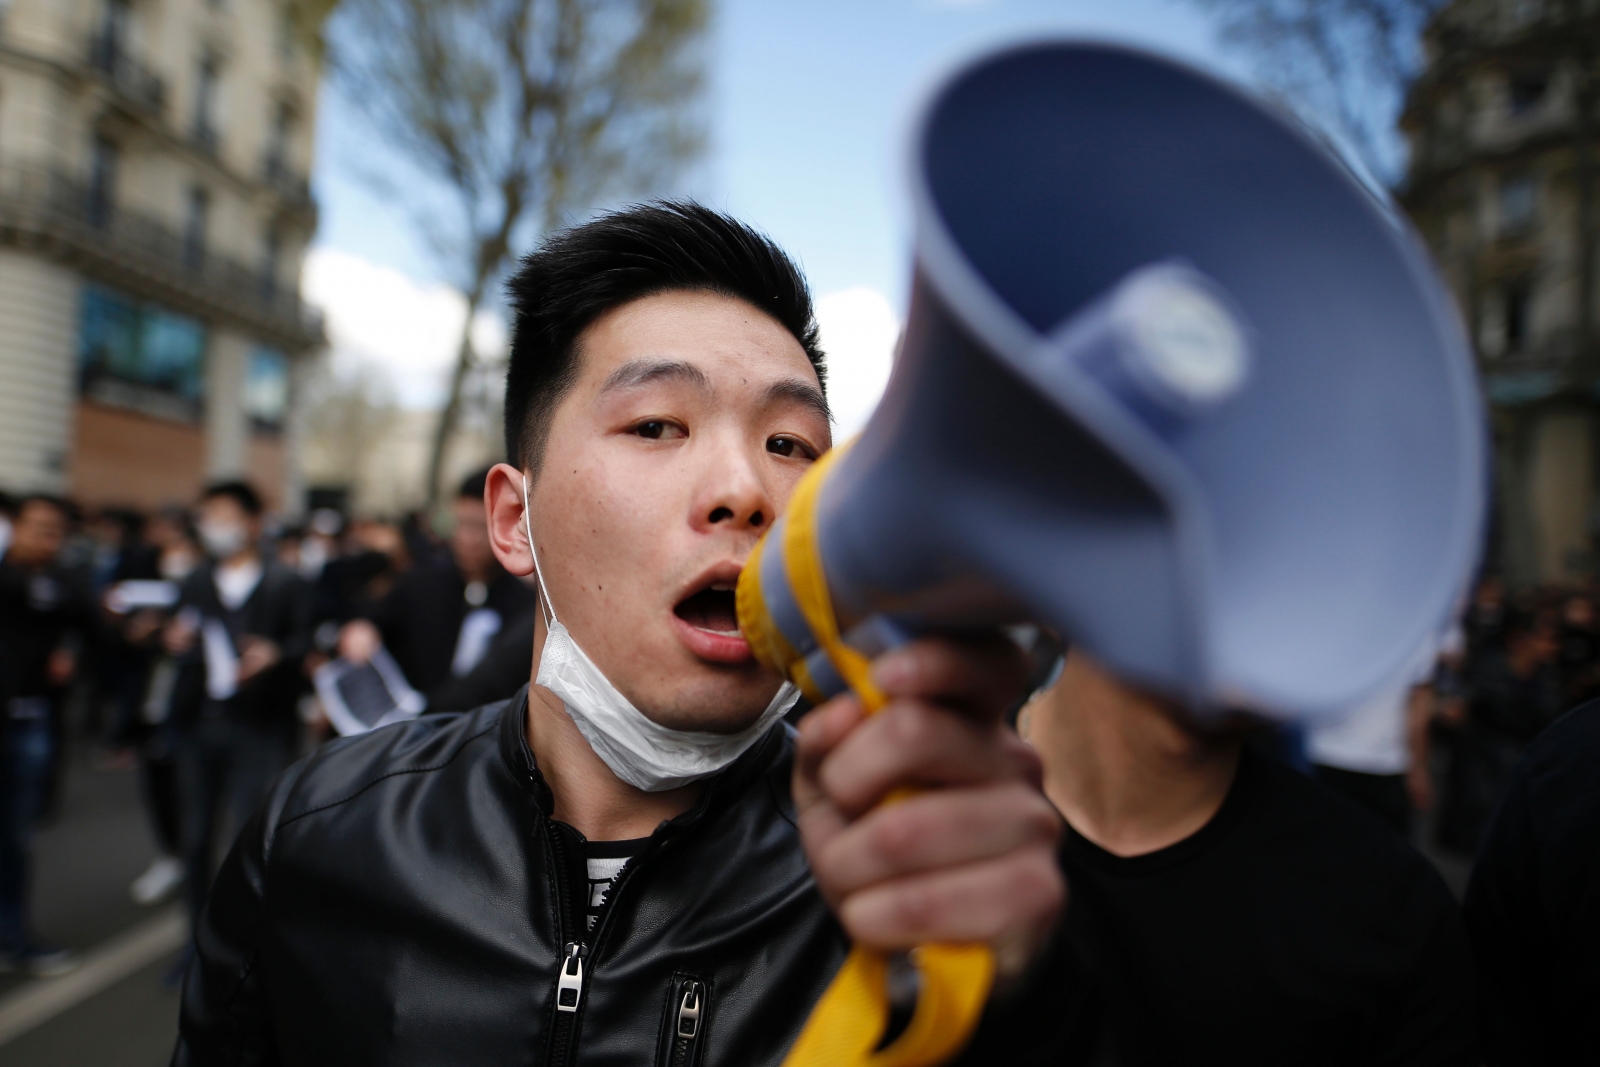 Protests in France: Why is the Chinese community in the streets?